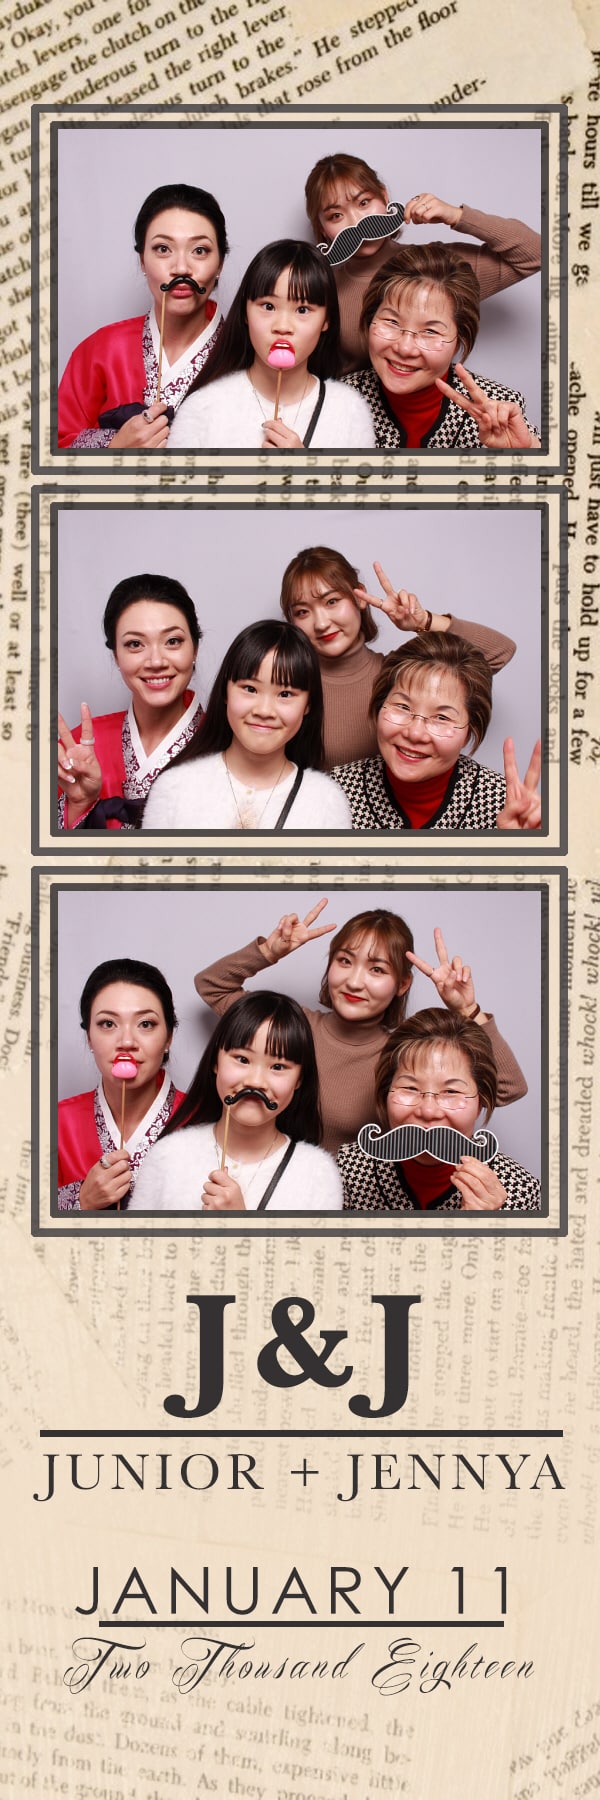 2x6 photo strip of group with props posing with white backdrop